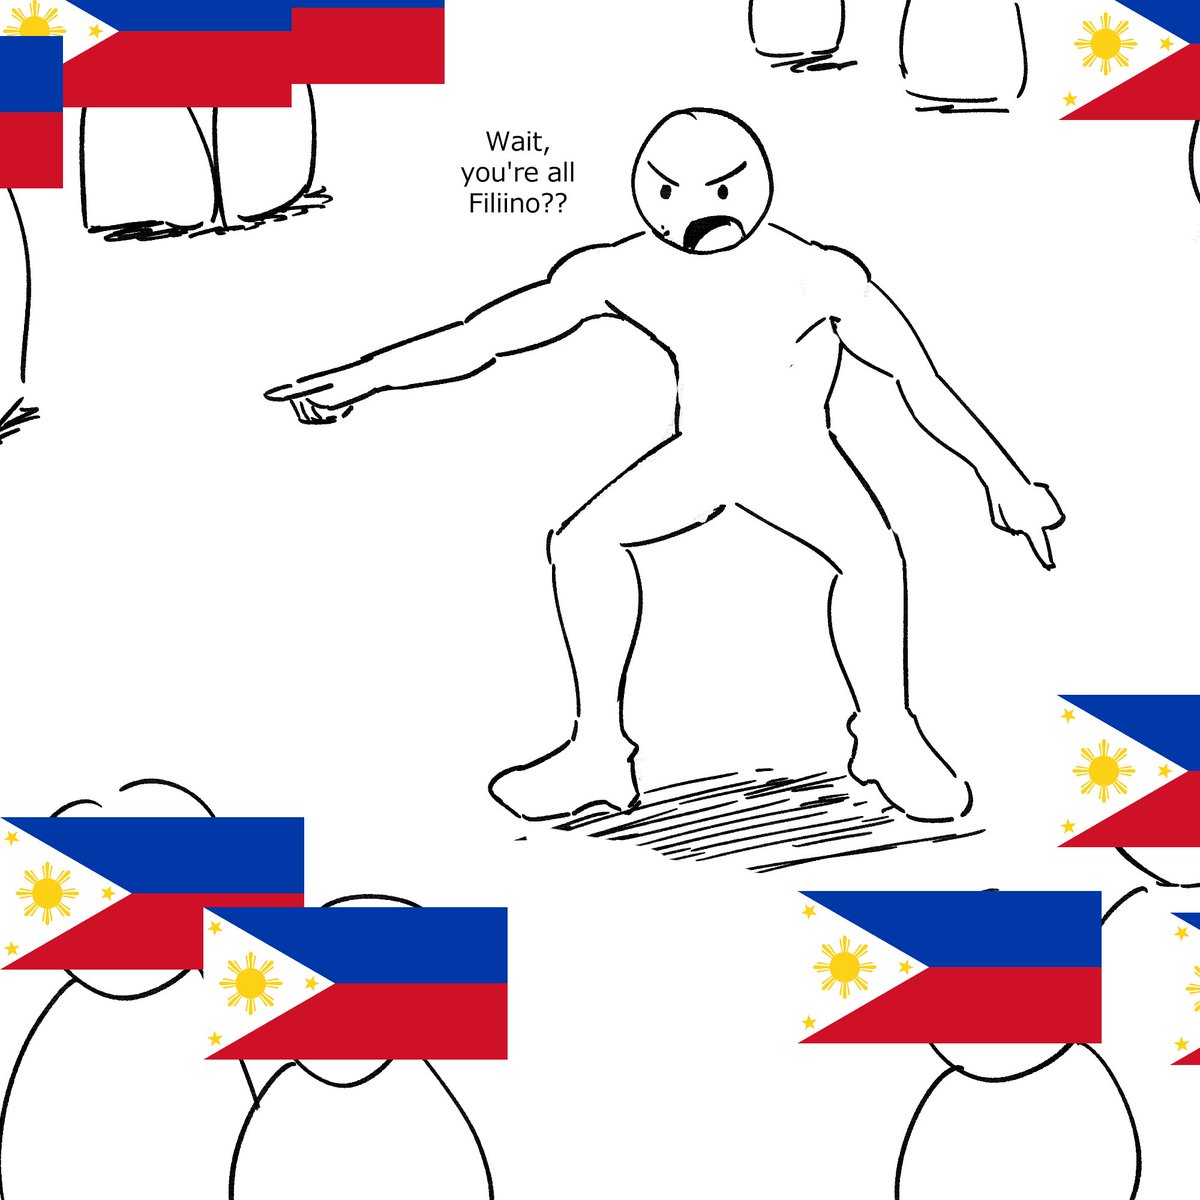 [rkgk] All of the sudden, I found out many if not most of my online moots/acquaintances are Filipino.